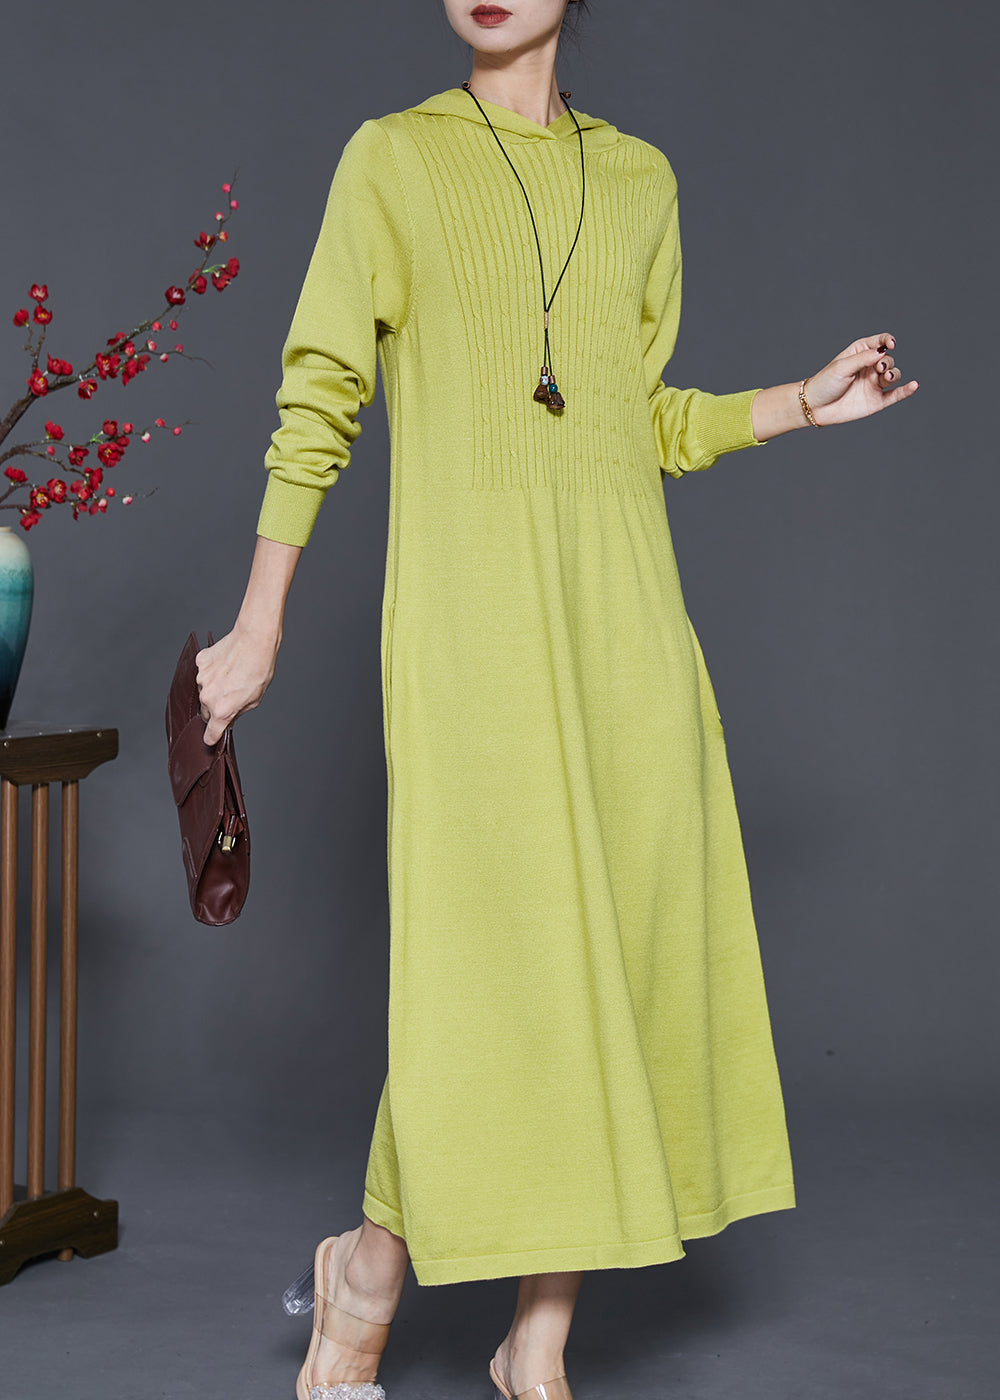 Grass Green Silm Fit Knit Dresses Hooded Spring